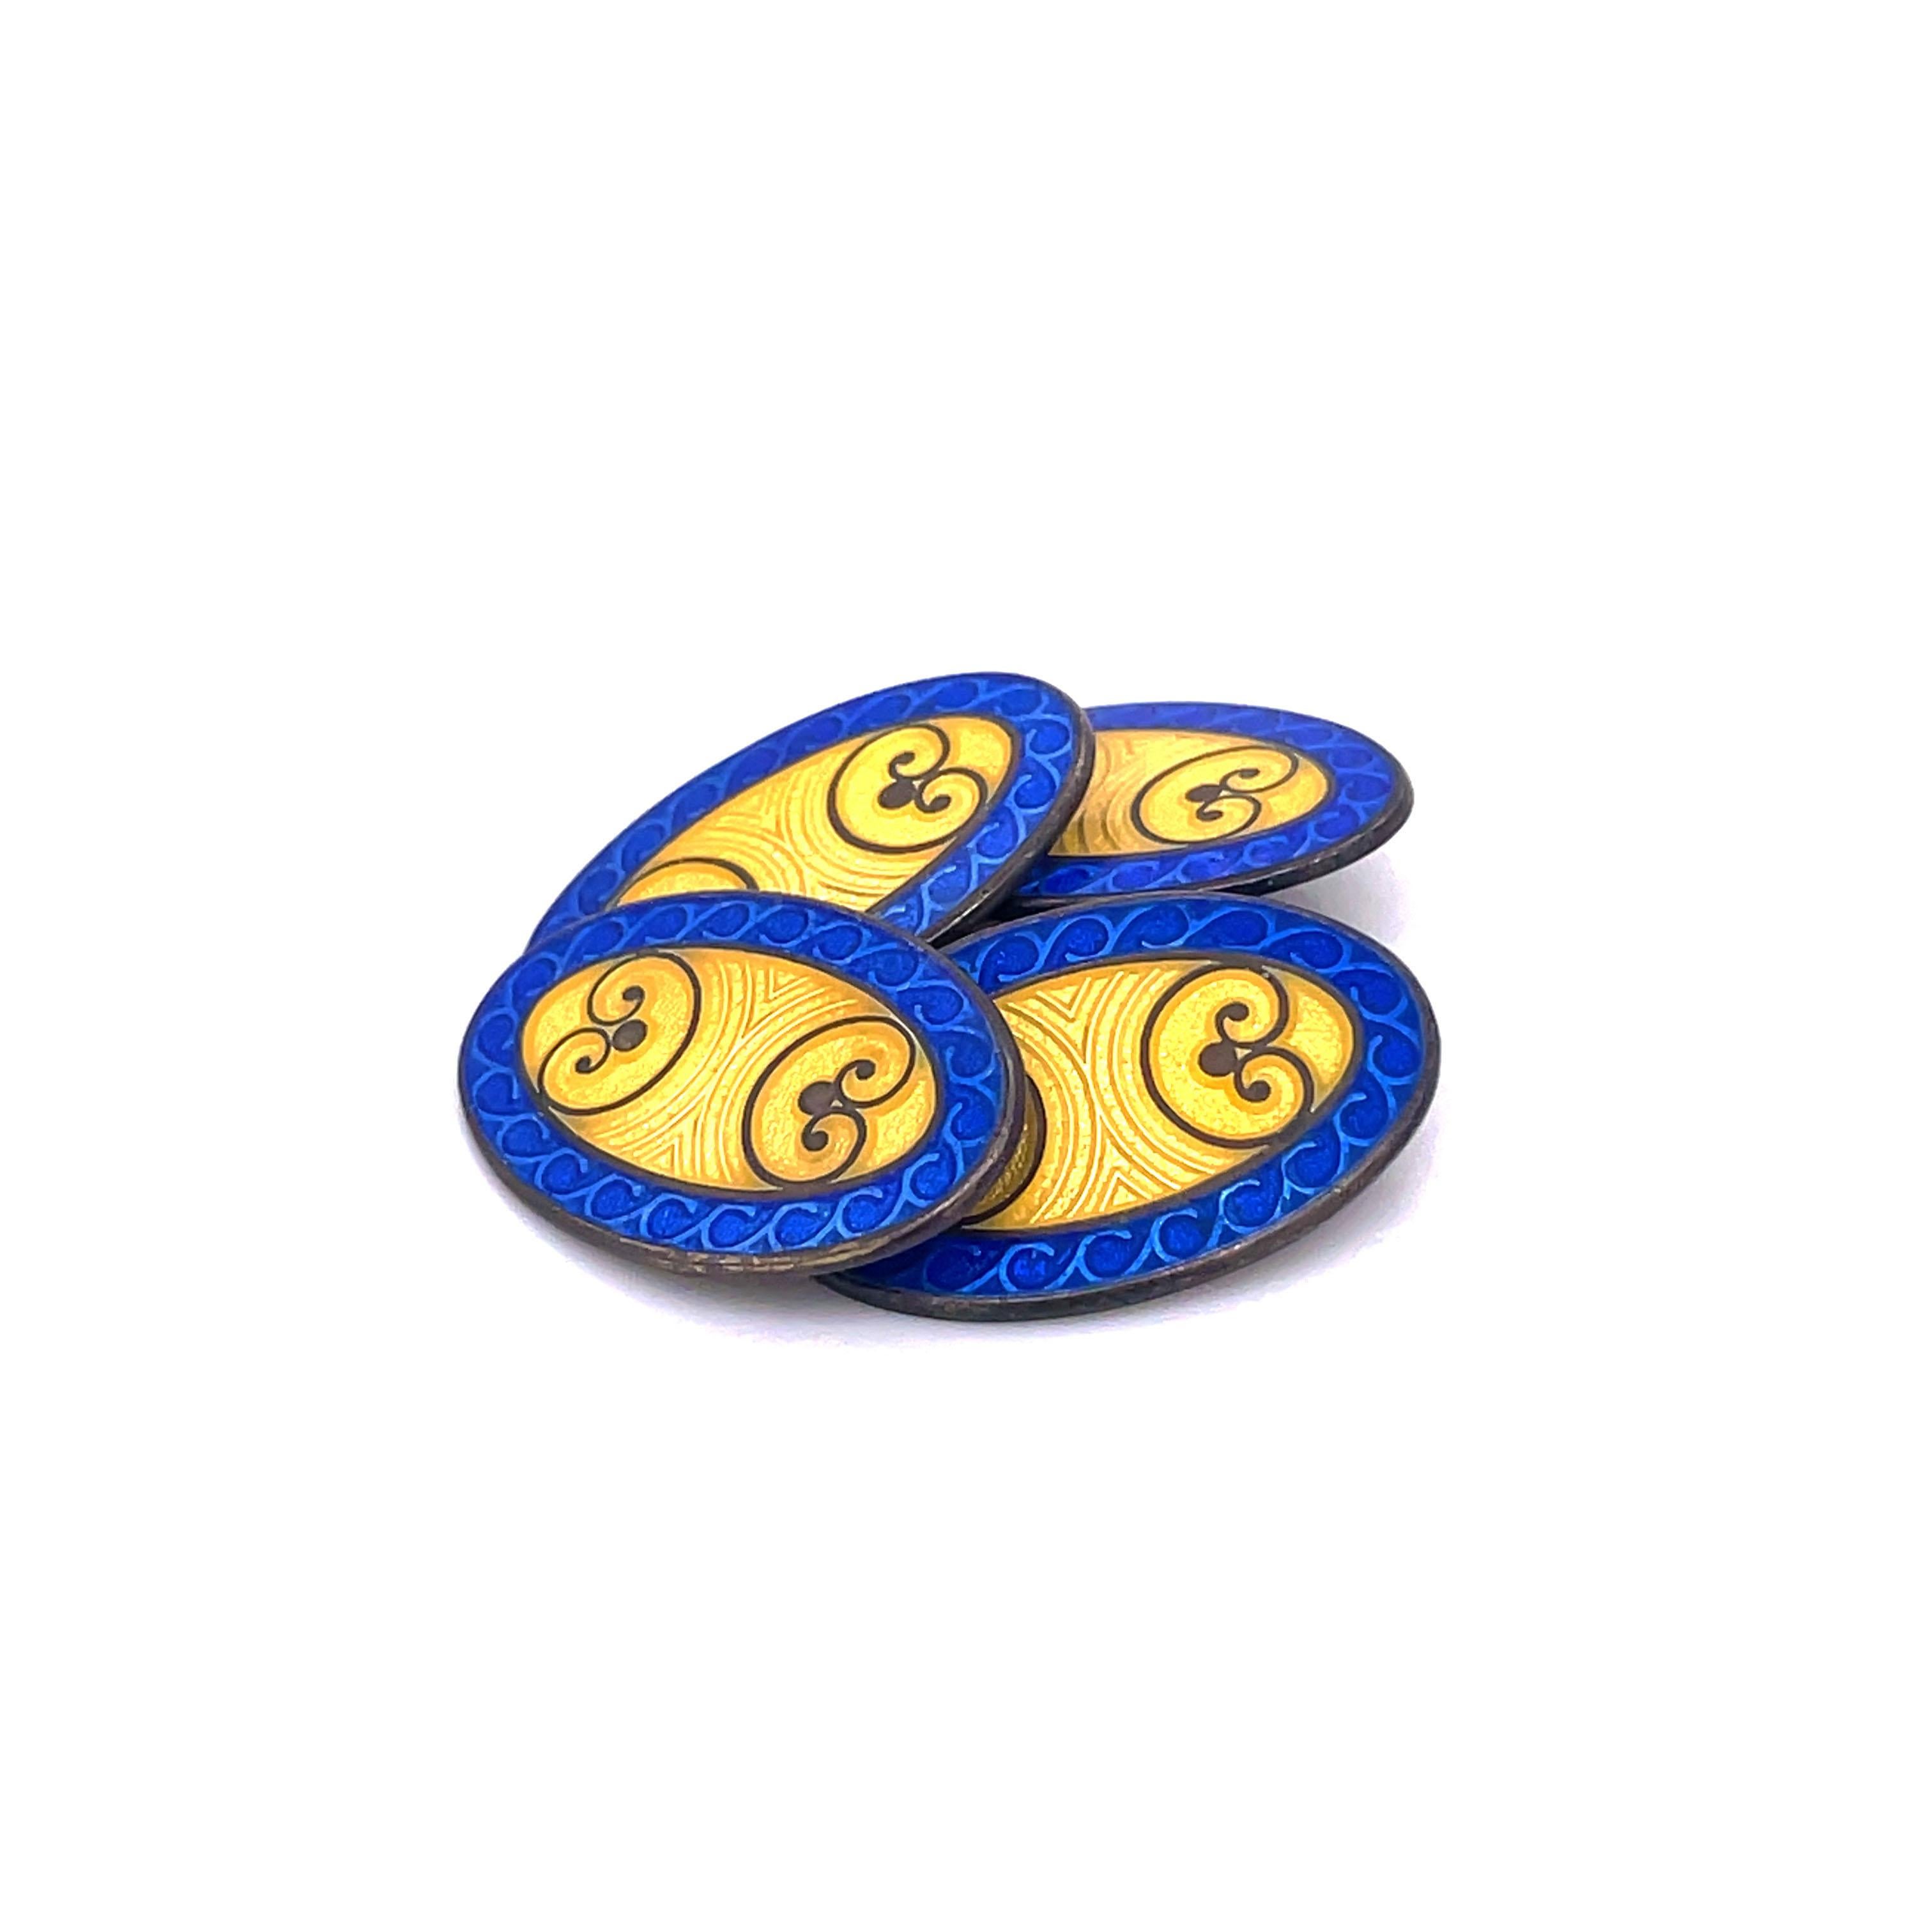 This is a striking set of Sterling Silver 1925 Deco cufflinks signed by Krementz that feature a bright and gorgeous yellow and royal blue enamel. The royal blue frame of the links is exceptional and demands attention, the bright blue harmoniously